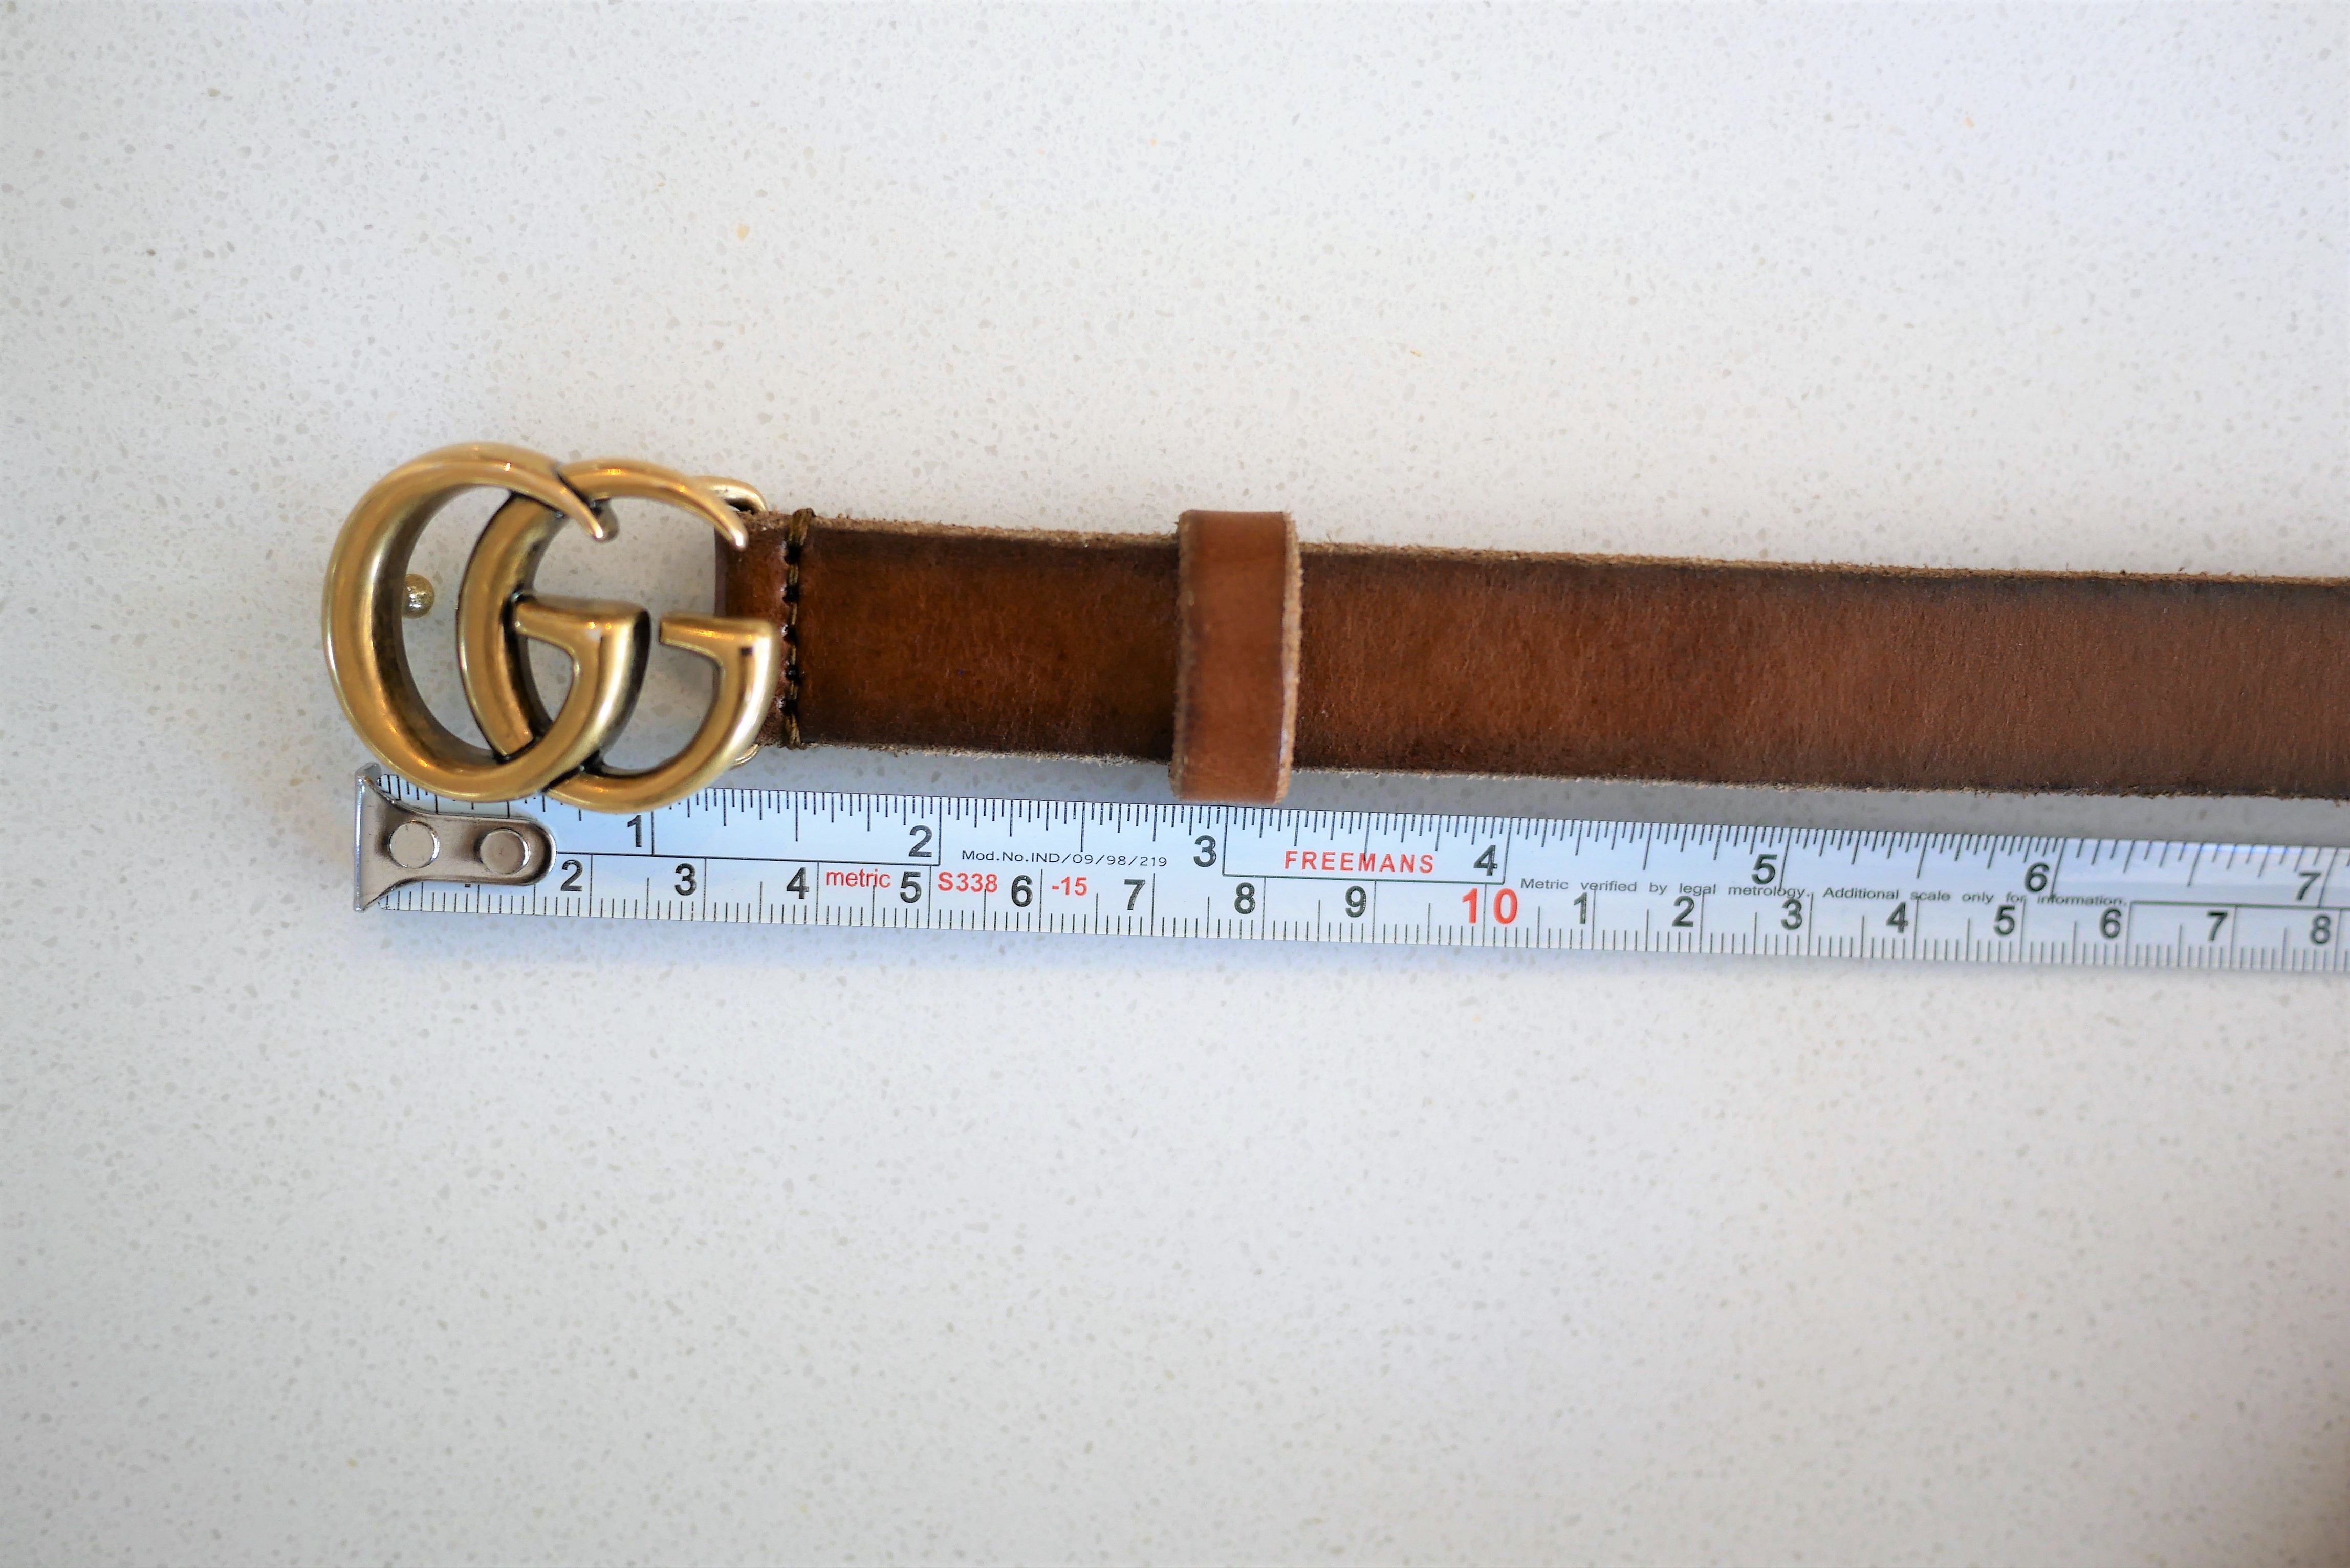 Gucci Marmont belt review/how to 